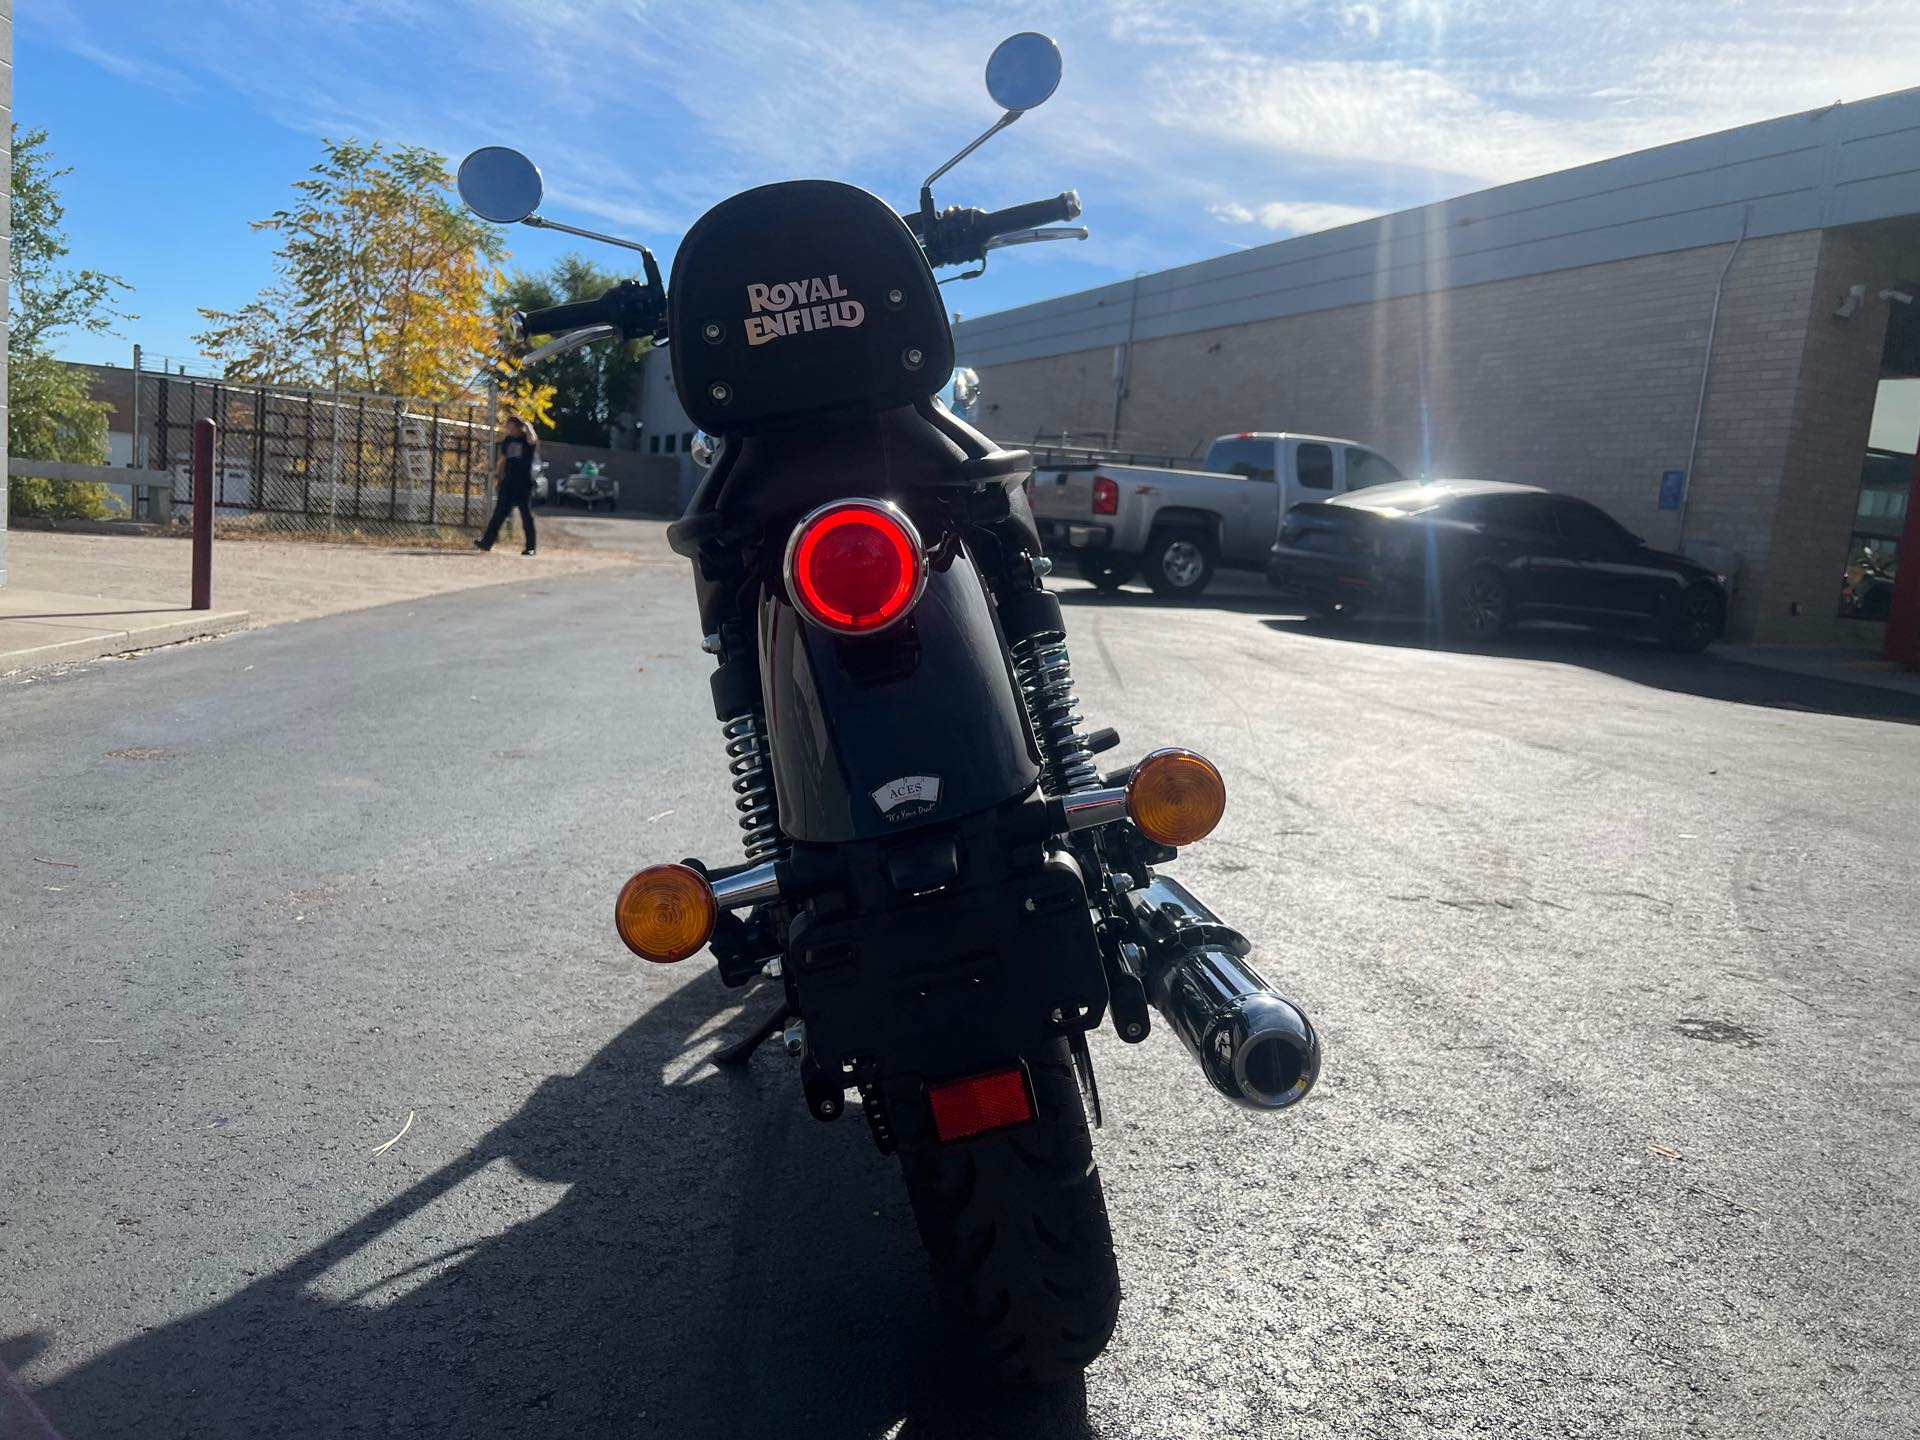 2021 Royal Enfield Meteor 350 at Aces Motorcycles - Fort Collins